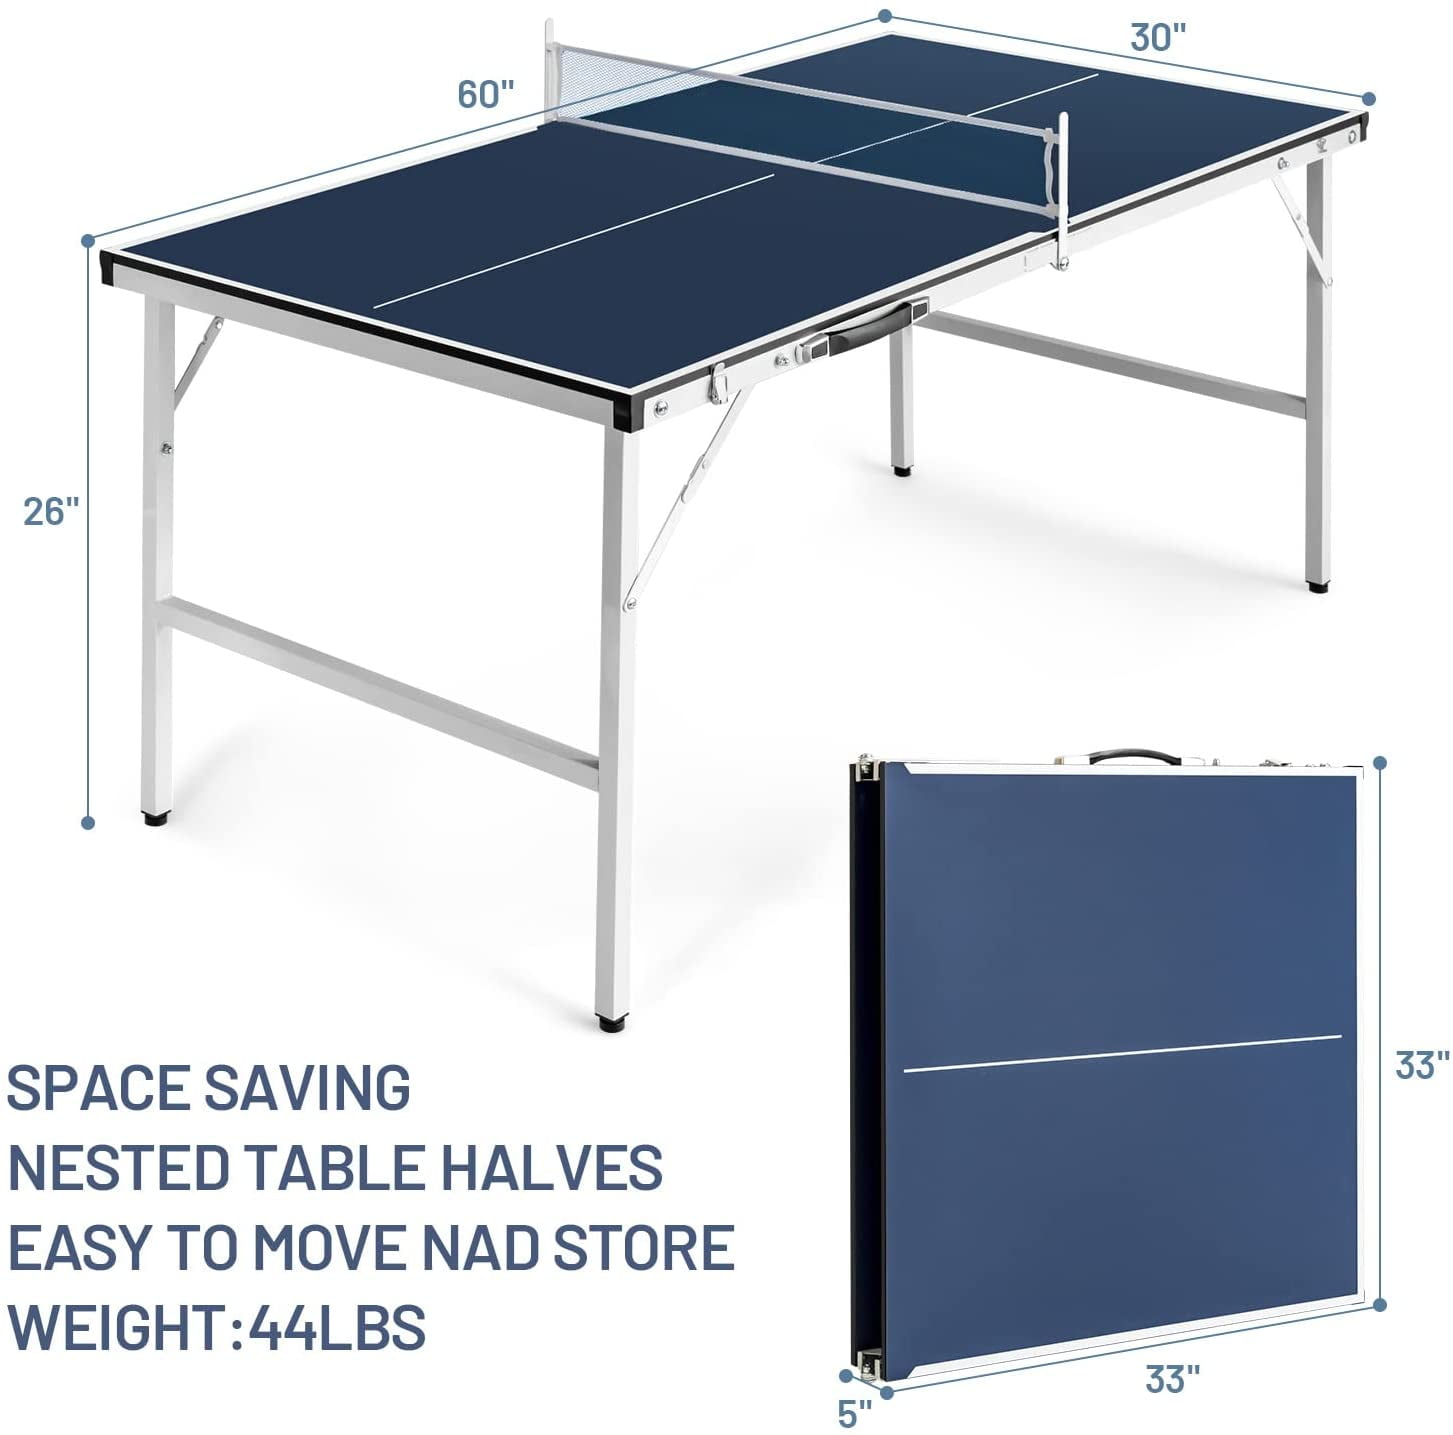 Professional MDF Indoor Table Tennis Table w/ Quick Clamp Ping Pong Net & Post 